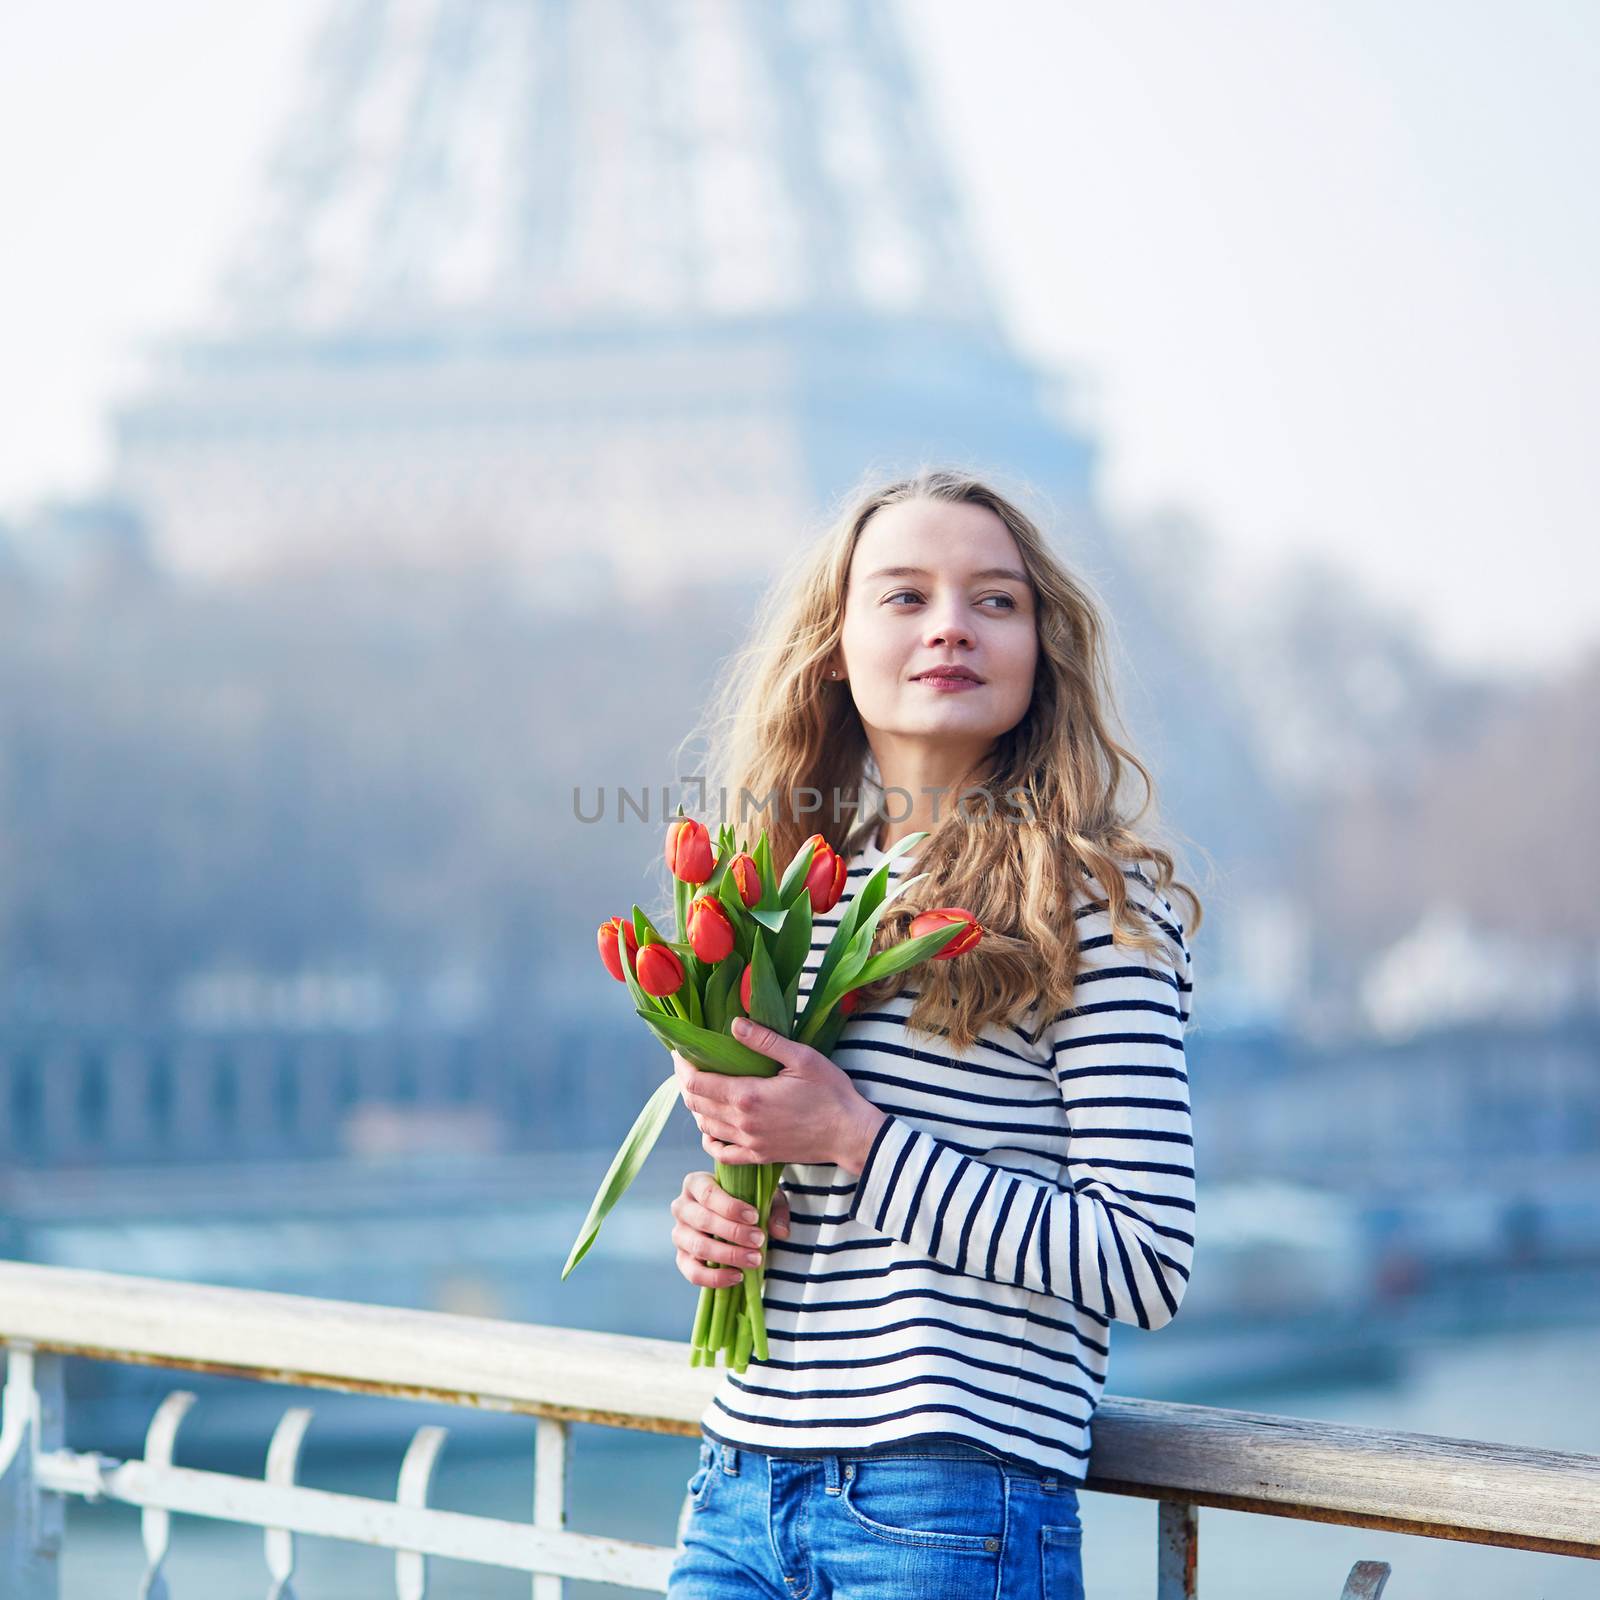 Beautiful young girl with bunch of red tulips near the Eiffel tower in Paris, France on a clear spring day